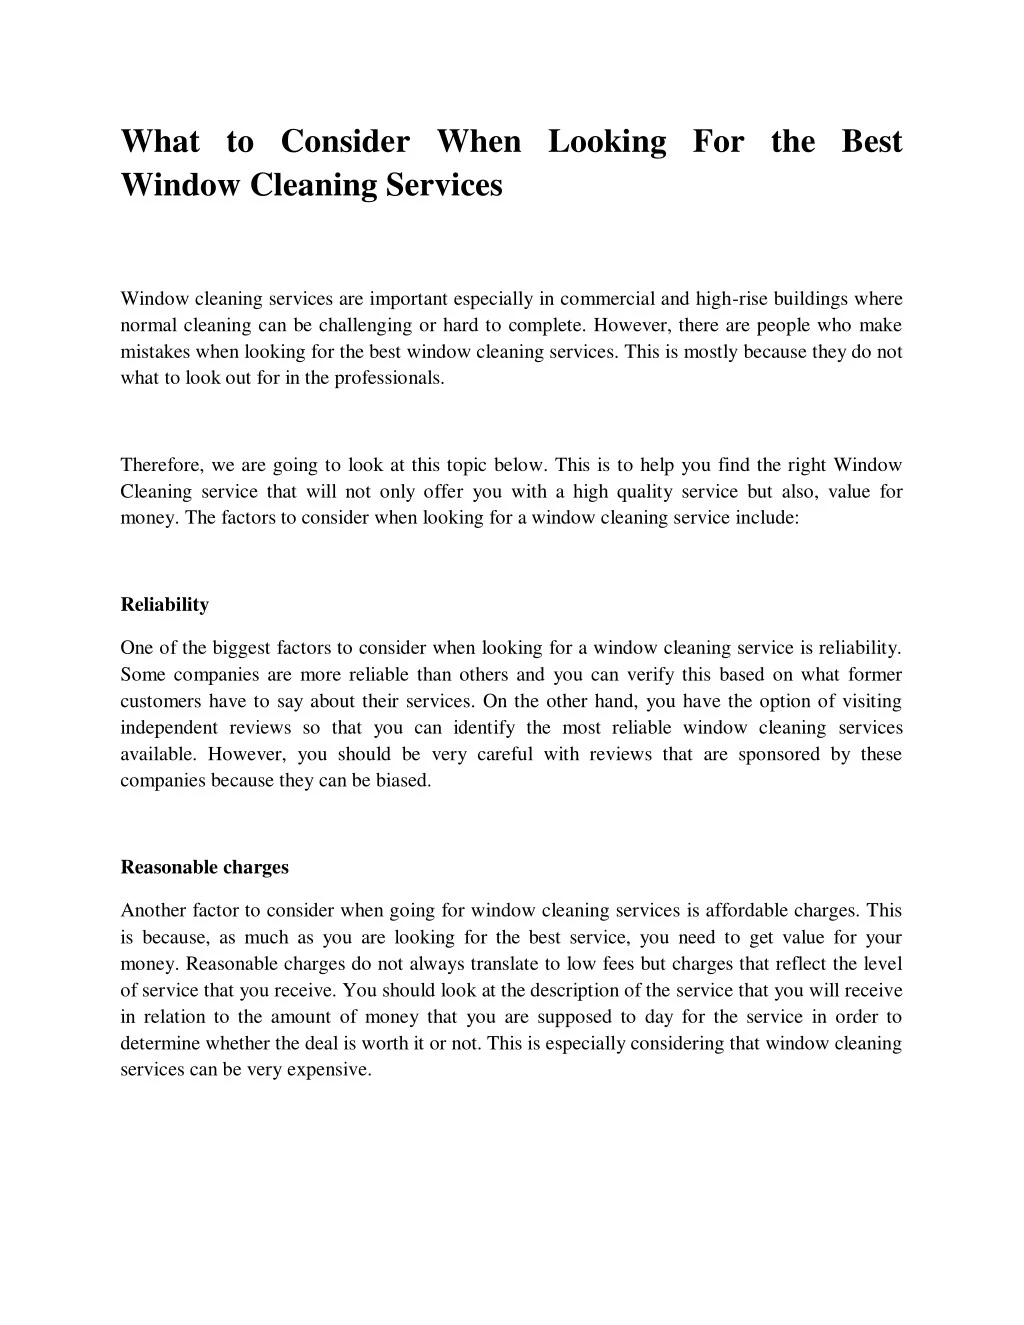 what to consider when looking for the best window